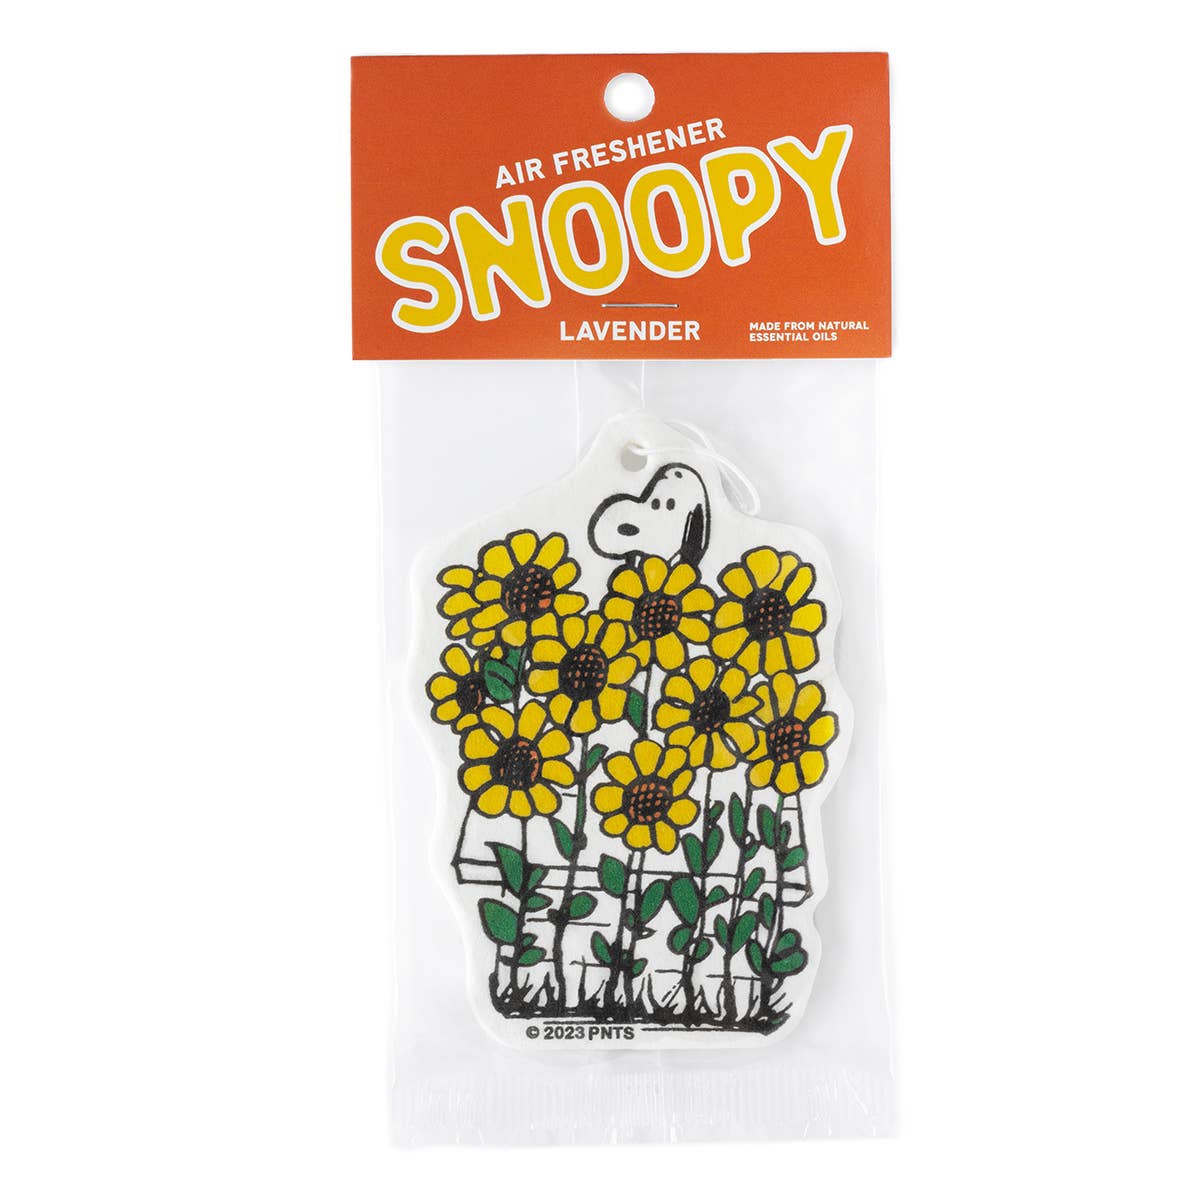 3P4 x Peanuts® - Snoopy Garden Air Freshener with sunflowers by Three Potato Four.